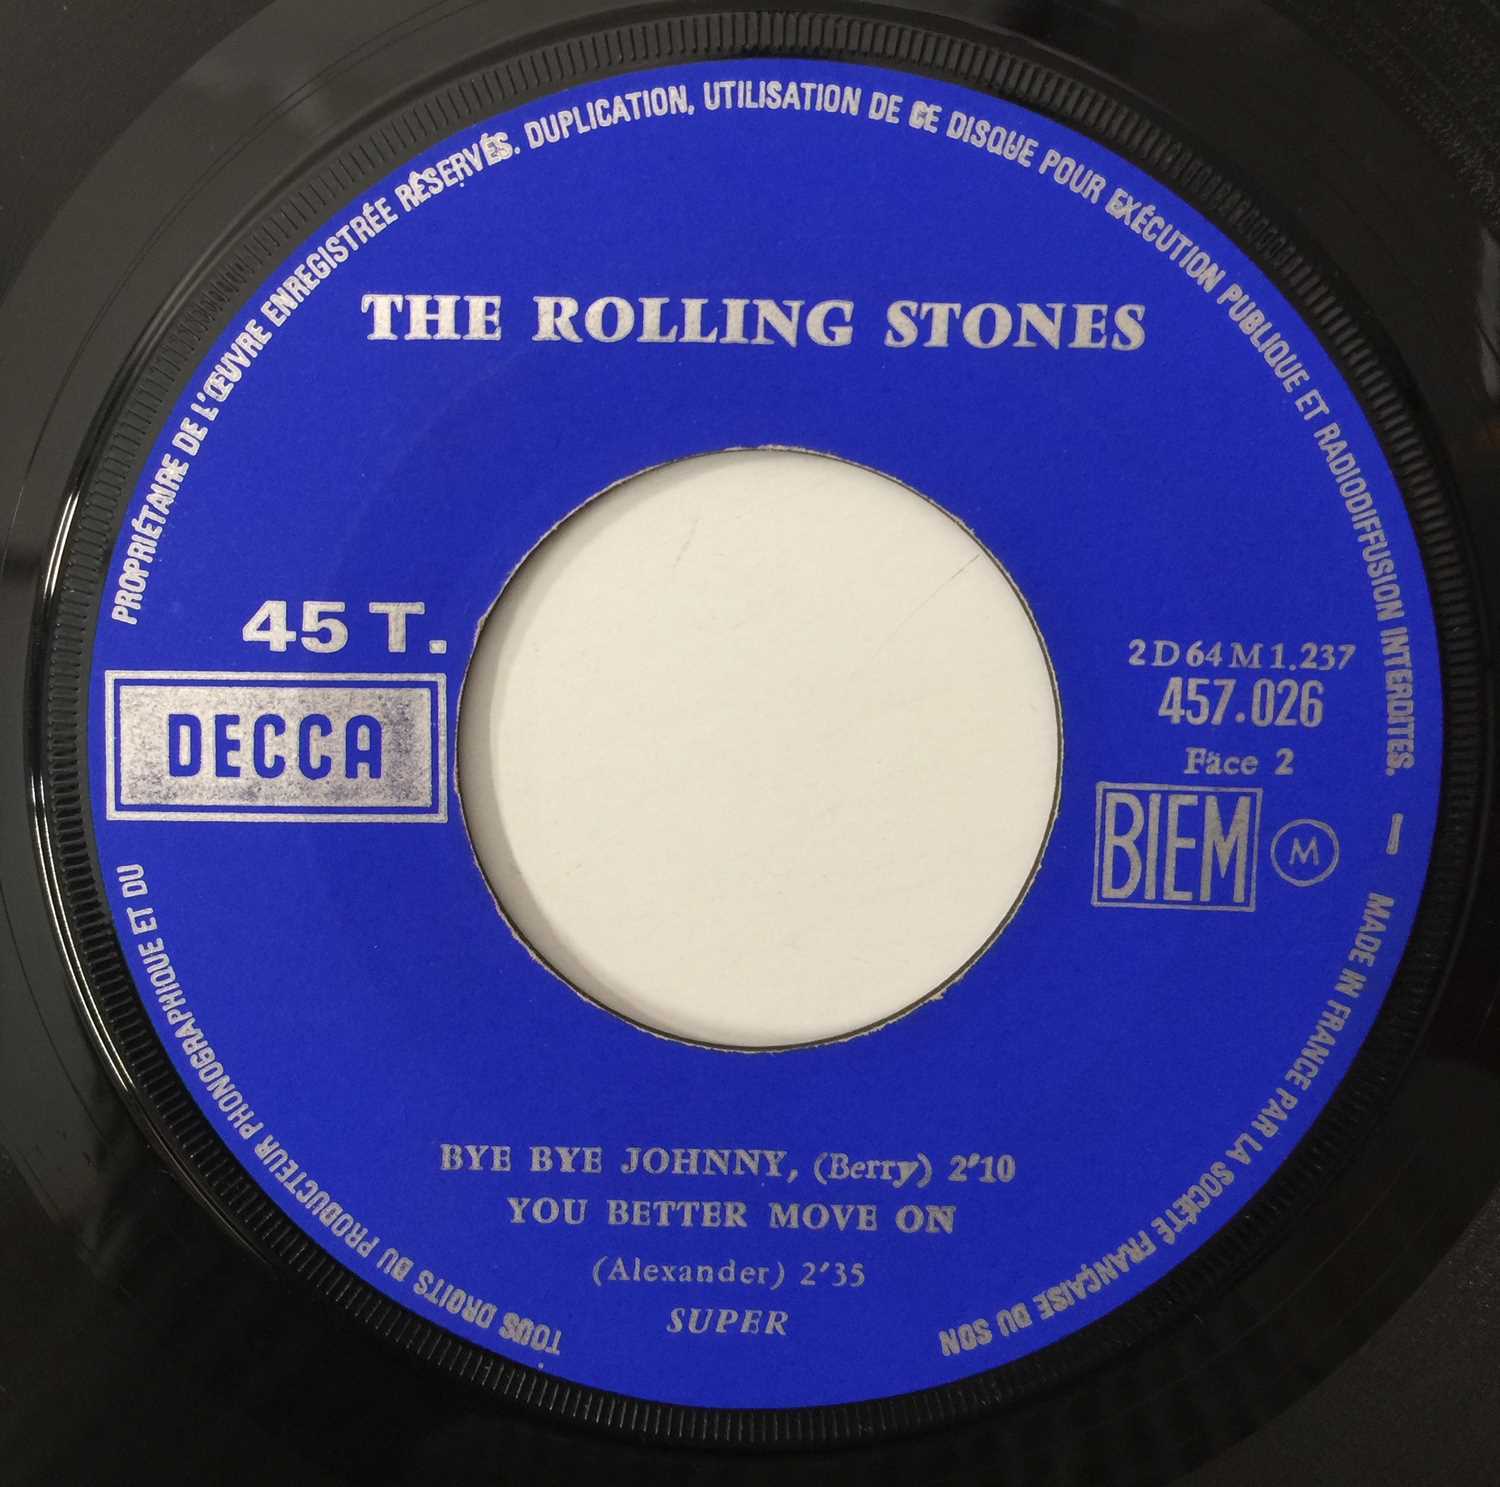 THE ROLLING STONES - I WANNA BE YOUR MAN 7" (457.026 M) - Image 5 of 5